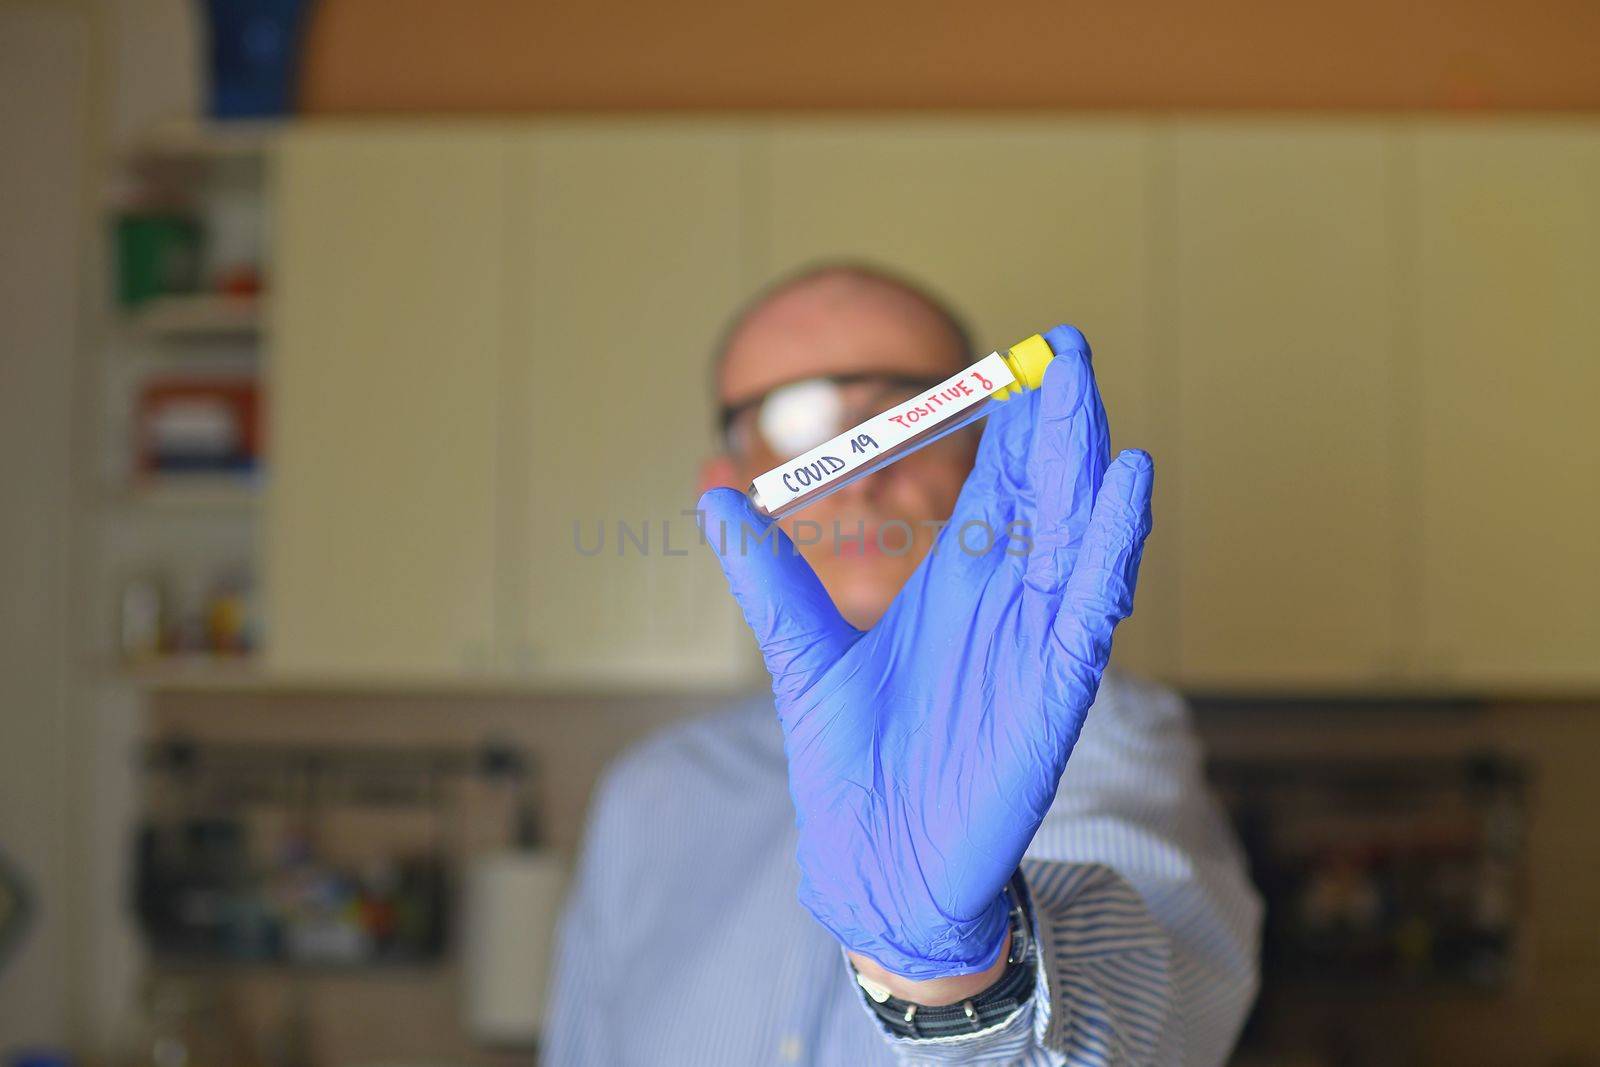 The sample of Covid 19 in the test tube. Doctor - epidemiologist holding thesample tube with sample of coronavirus